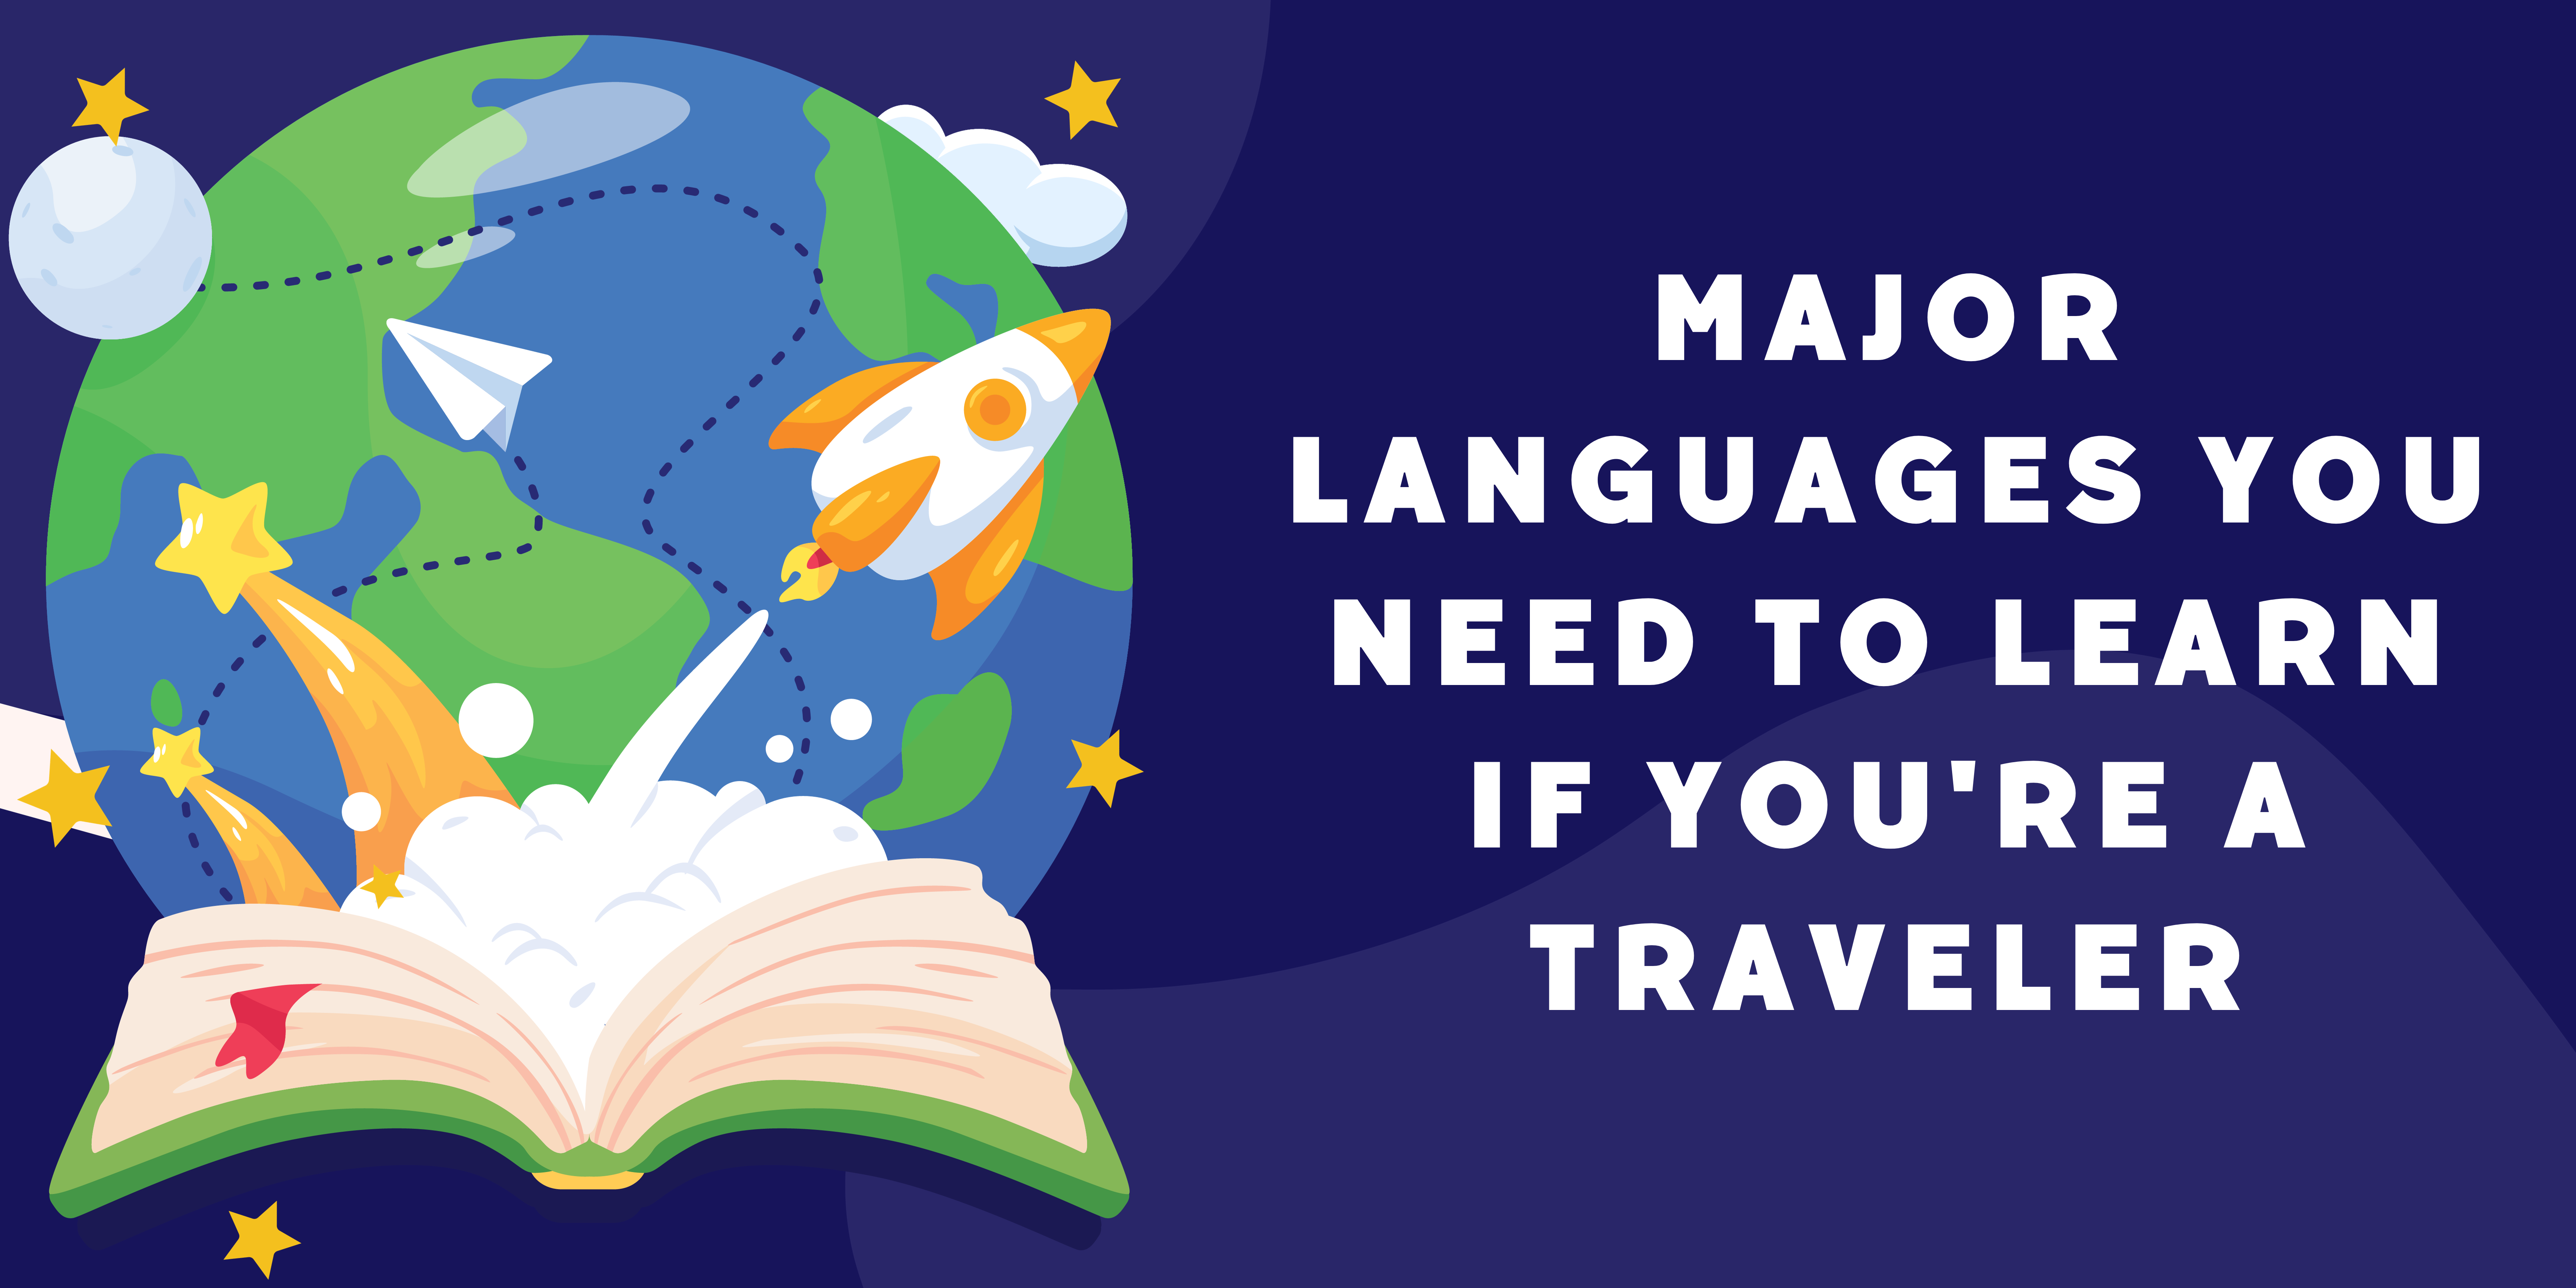 Major Languages You Need to Learn If You're a Traveler